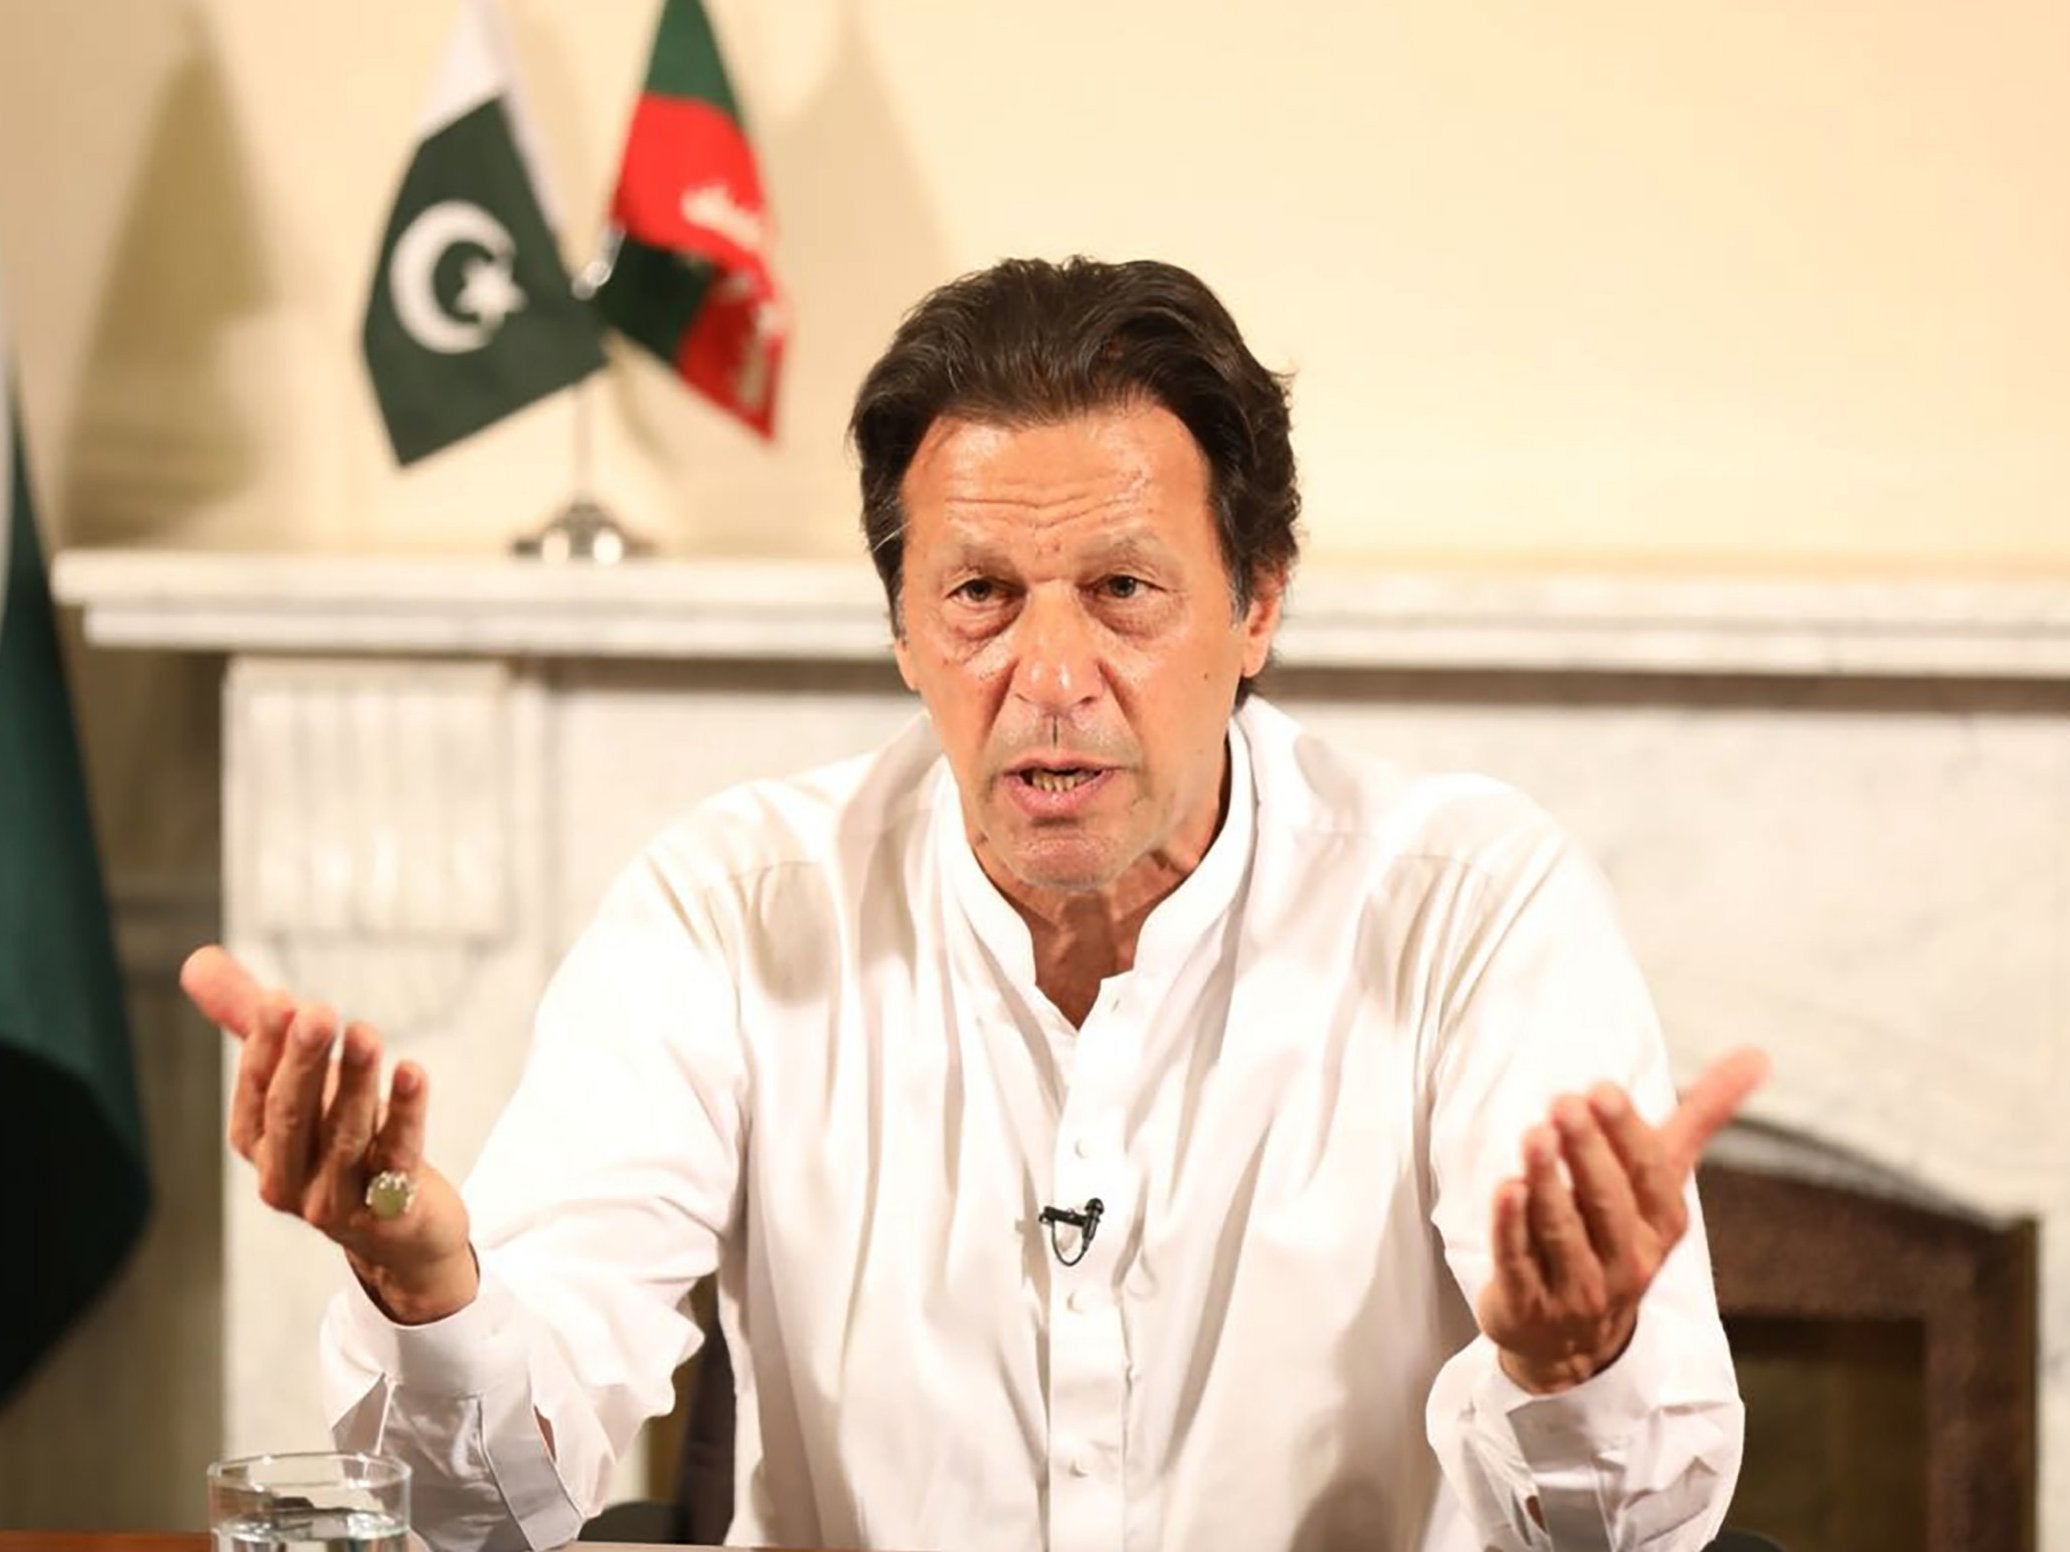 Pakistan's cricketer-turned politician Imran Khan, and head of the Pakistan Tehreek-e-Insaf (Movement for Justice) party, addresses the nation at his residence in Islamabad a day after general election